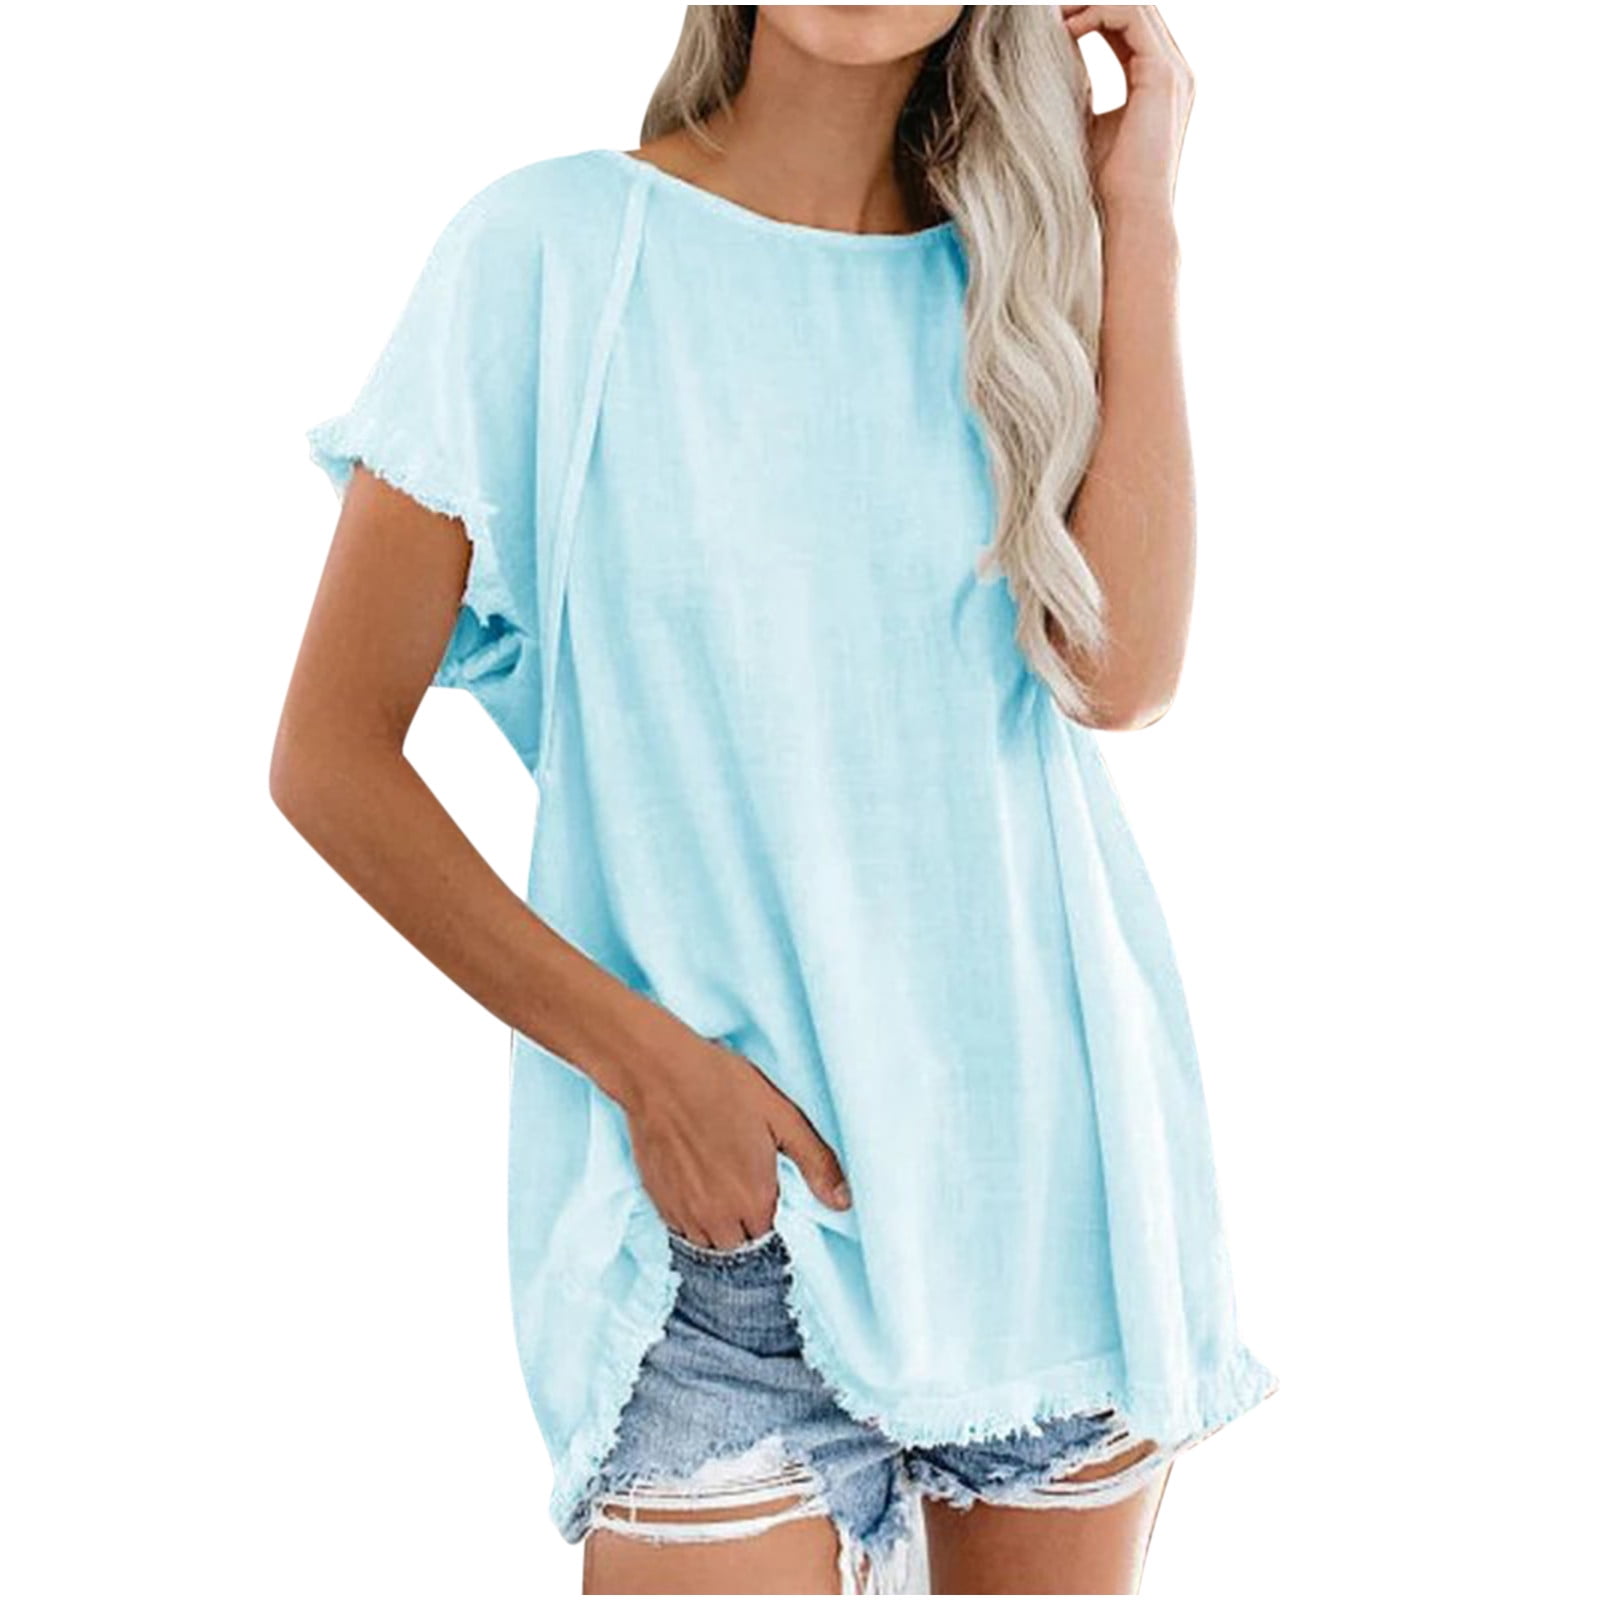 ZQGJB Summer Casual Short Sleeve Shirts for Women Solid Color Crewneck Tees  Loose Tassels Cotton T-Shirts Trendy Cozy Tunic Blouse Light Blue L